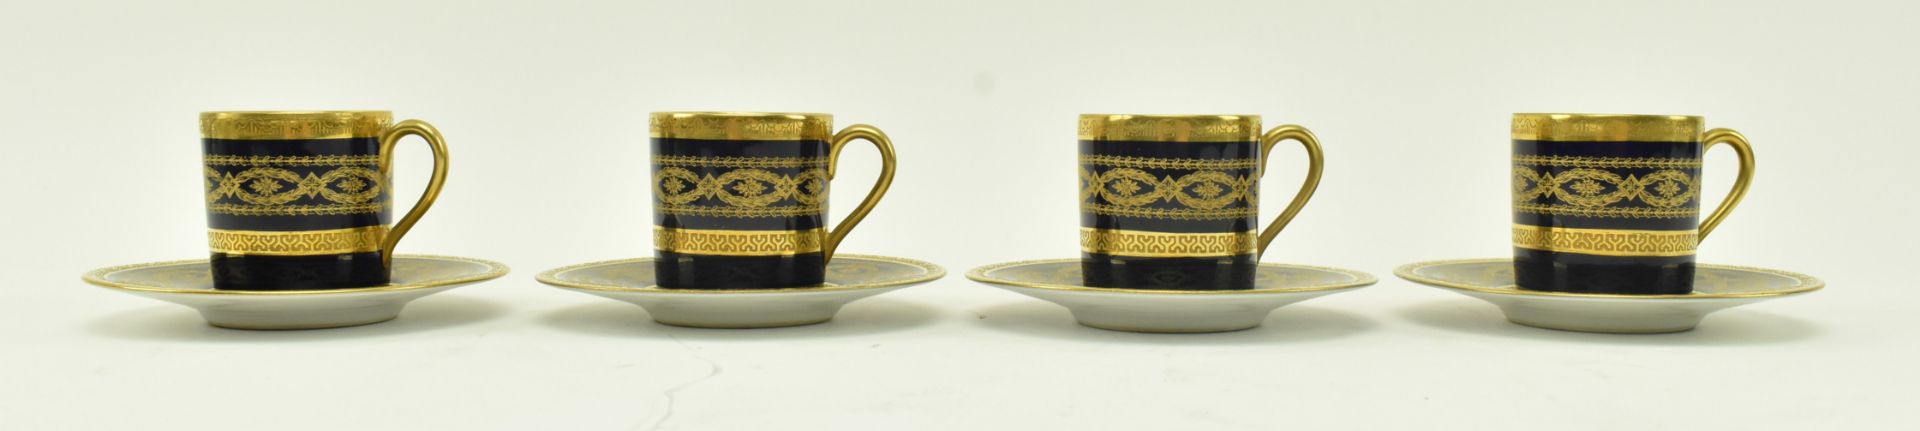 HUTSCHENEREUTHER - EARLY 20TH CENTURY CHINA CUPS & SAUCERS - Bild 3 aus 6